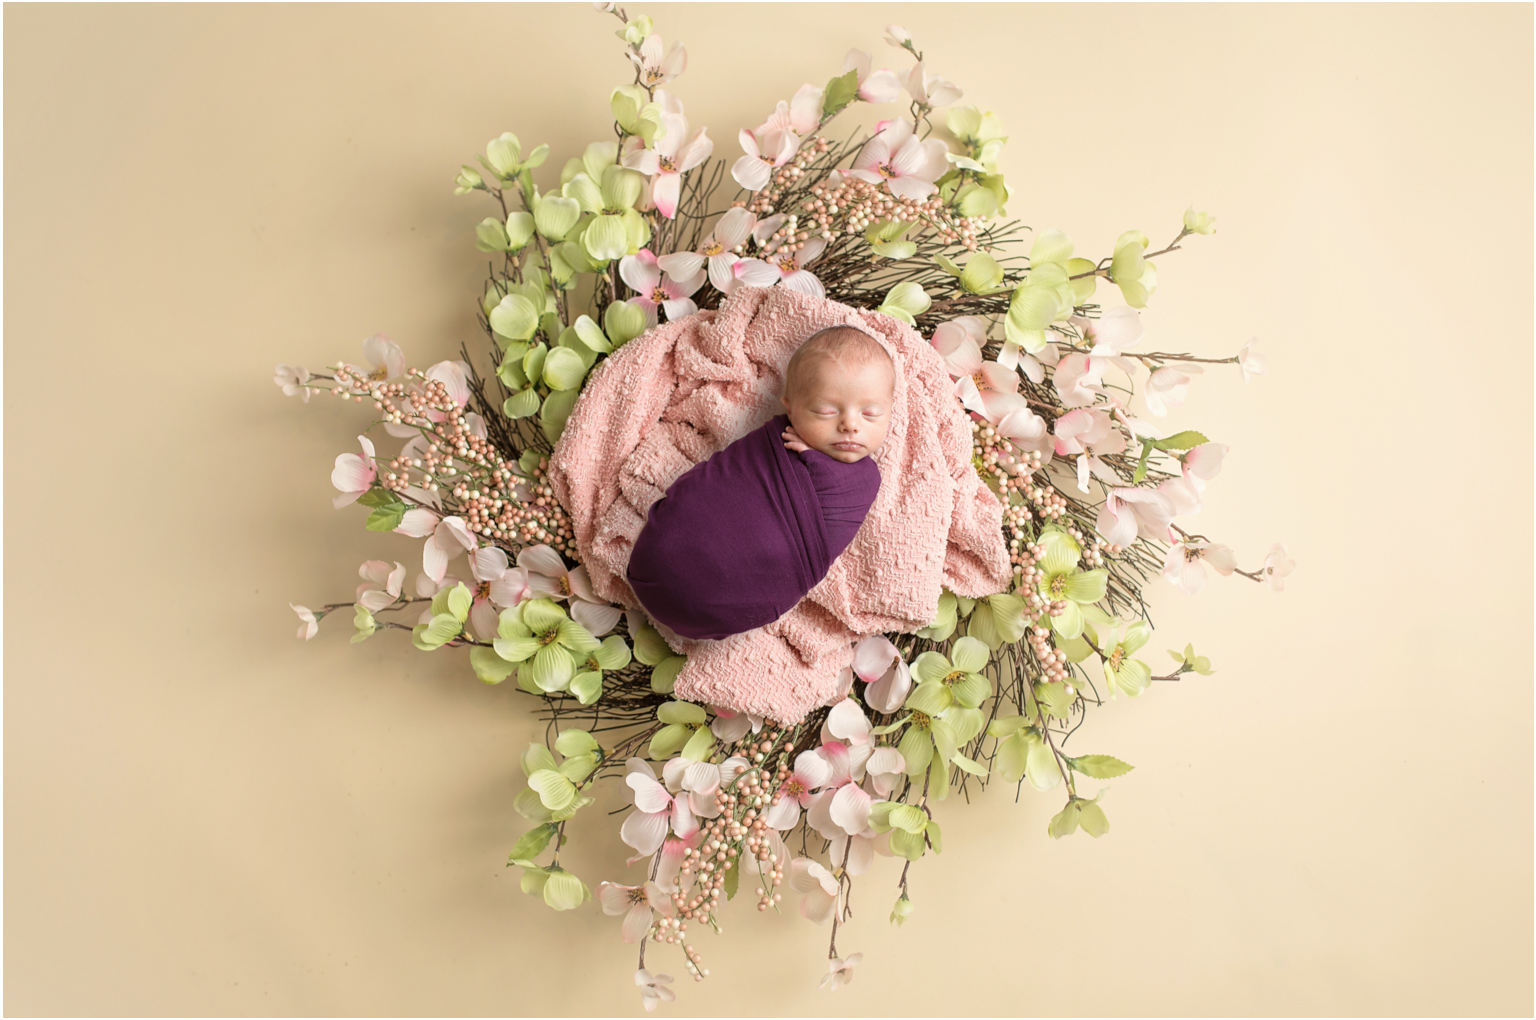 Juliann Pink and green floral wreath with purple wrap artwork